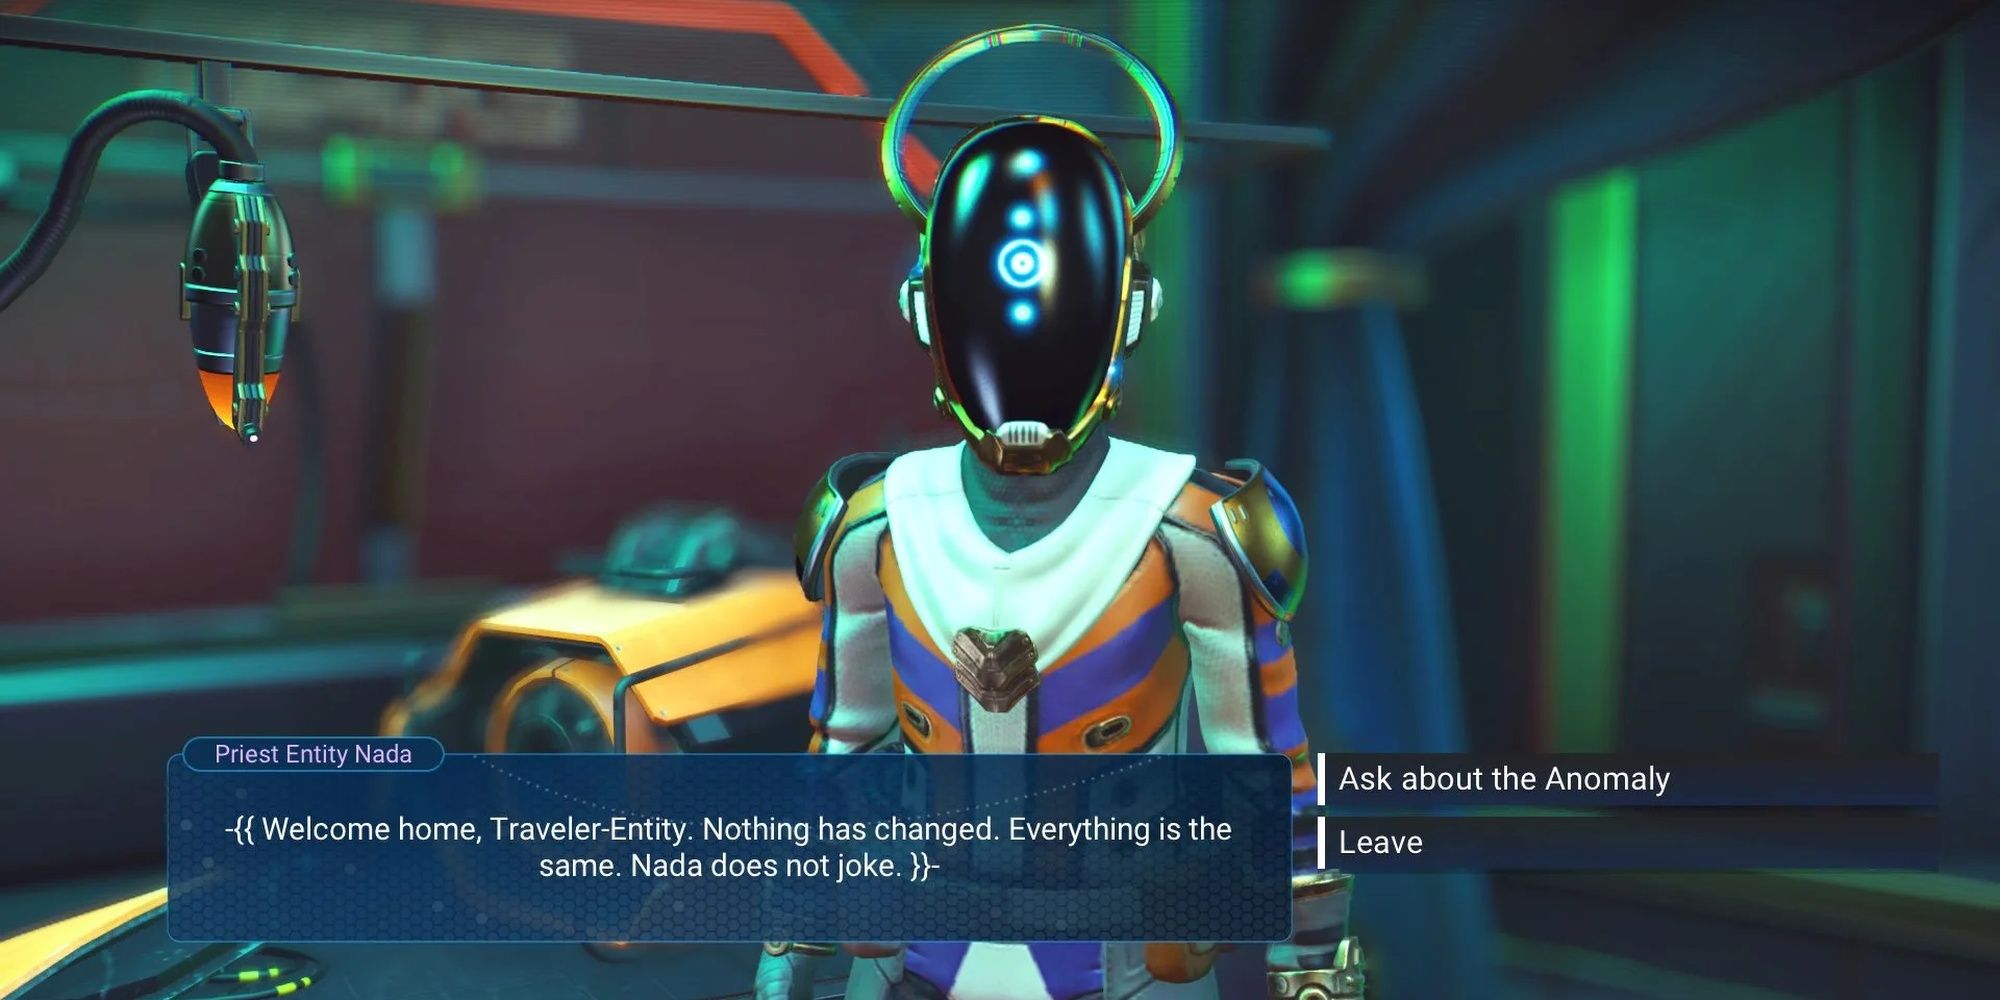 Priest entity Nada greets players in the No Man's Sky anomaly.